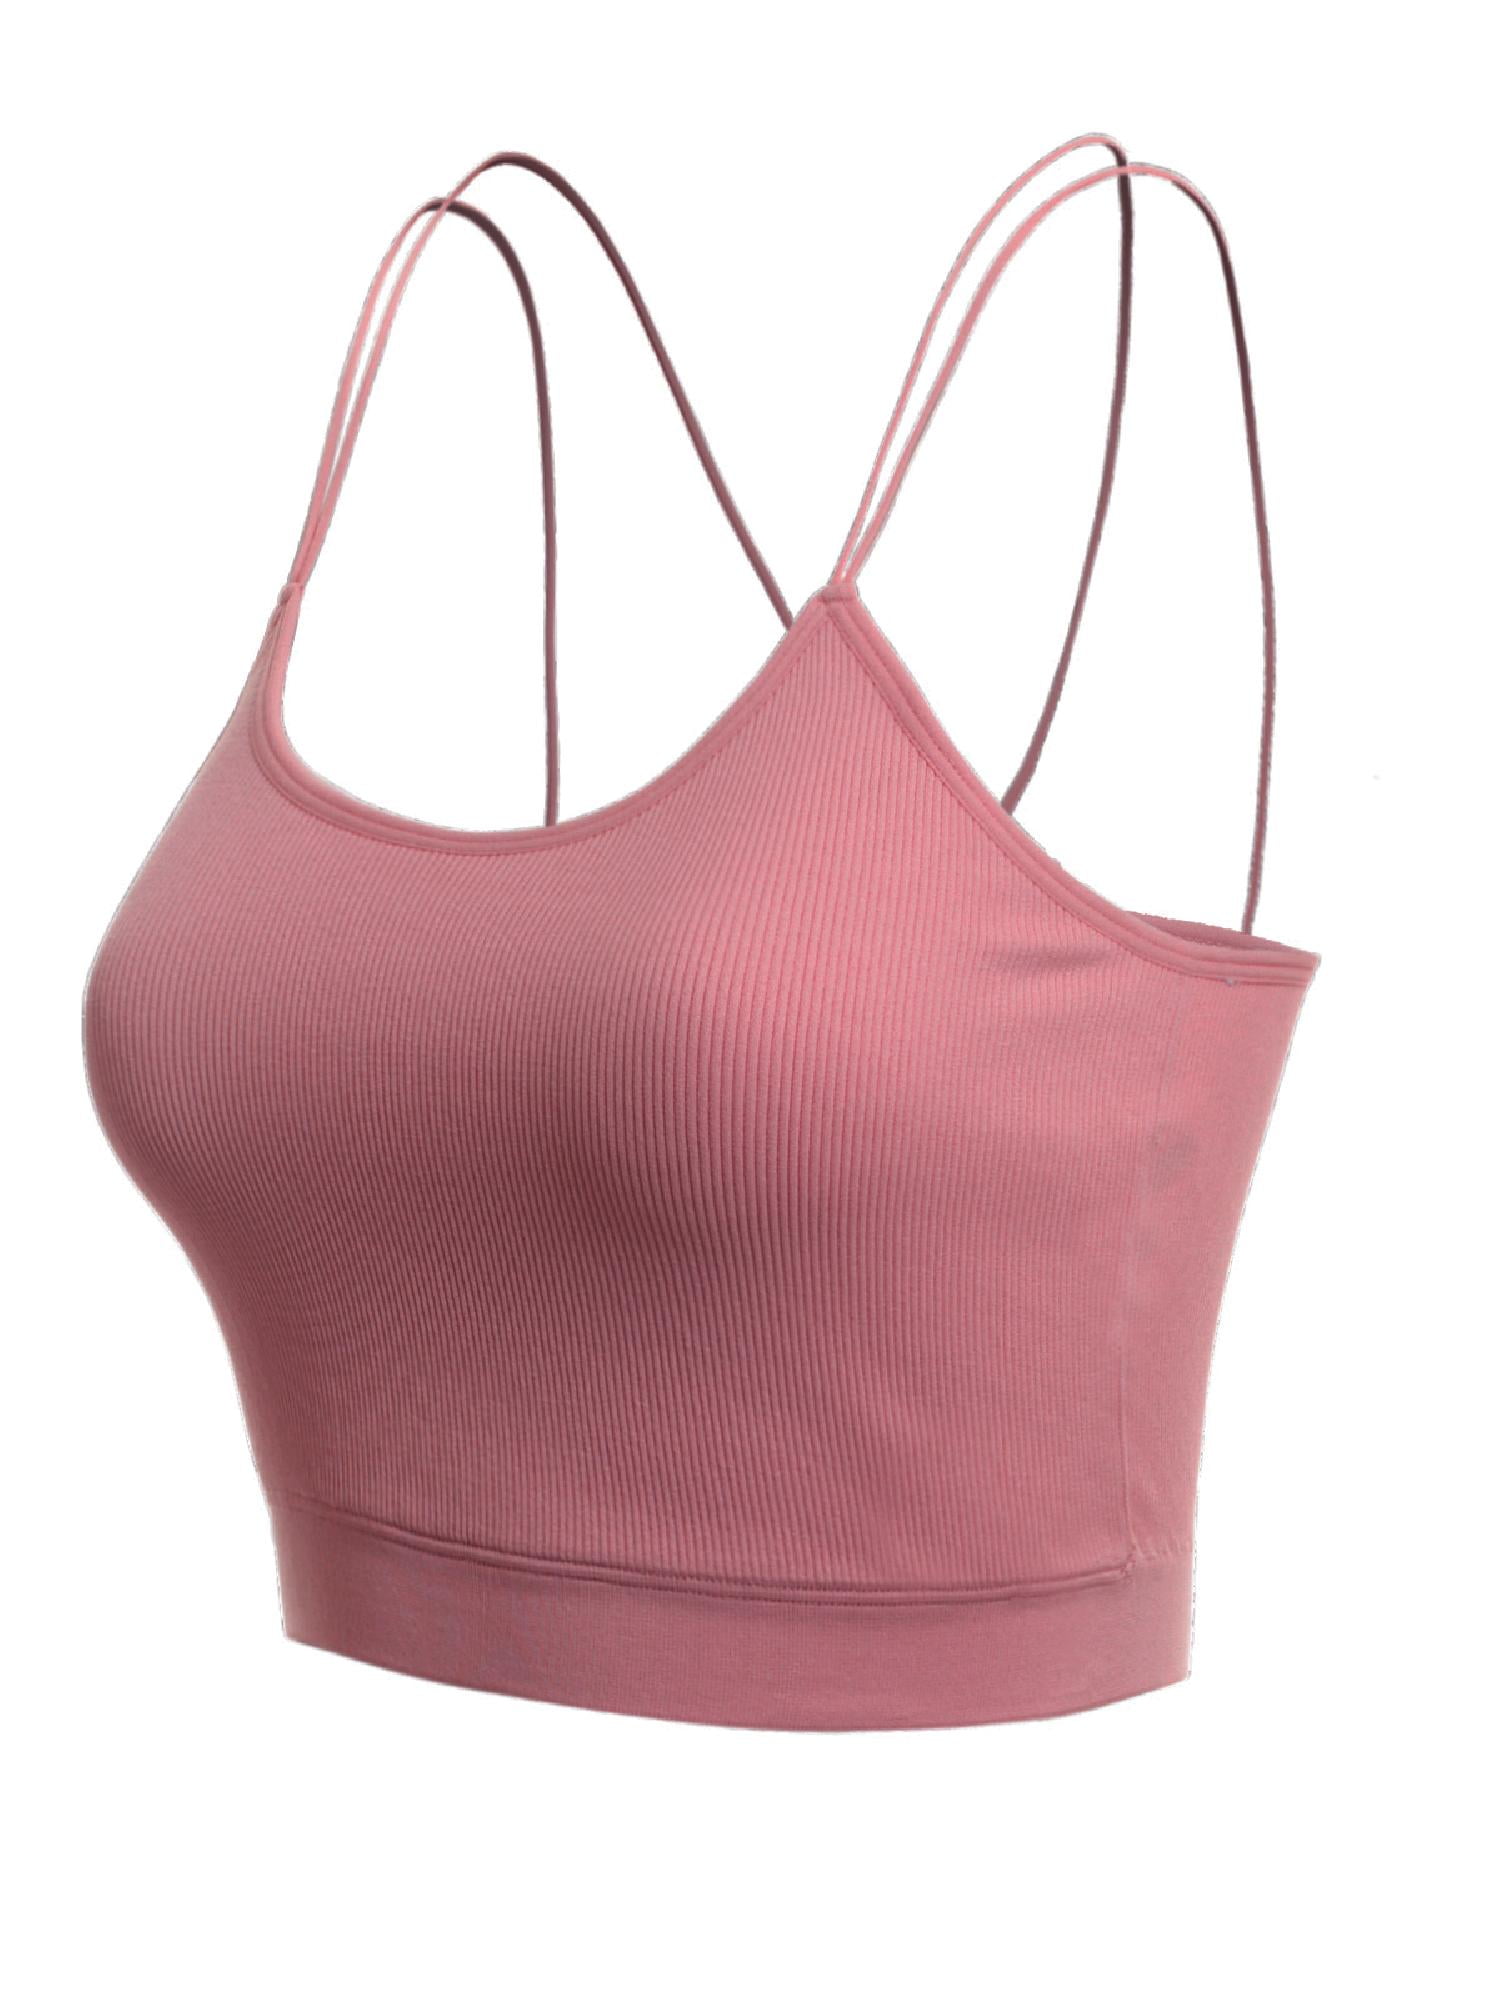 Funky Fish Plain Front Criss Cross Strap Spaghetti Straps Bra, Color Pink,  Size S price in Egypt,  Egypt